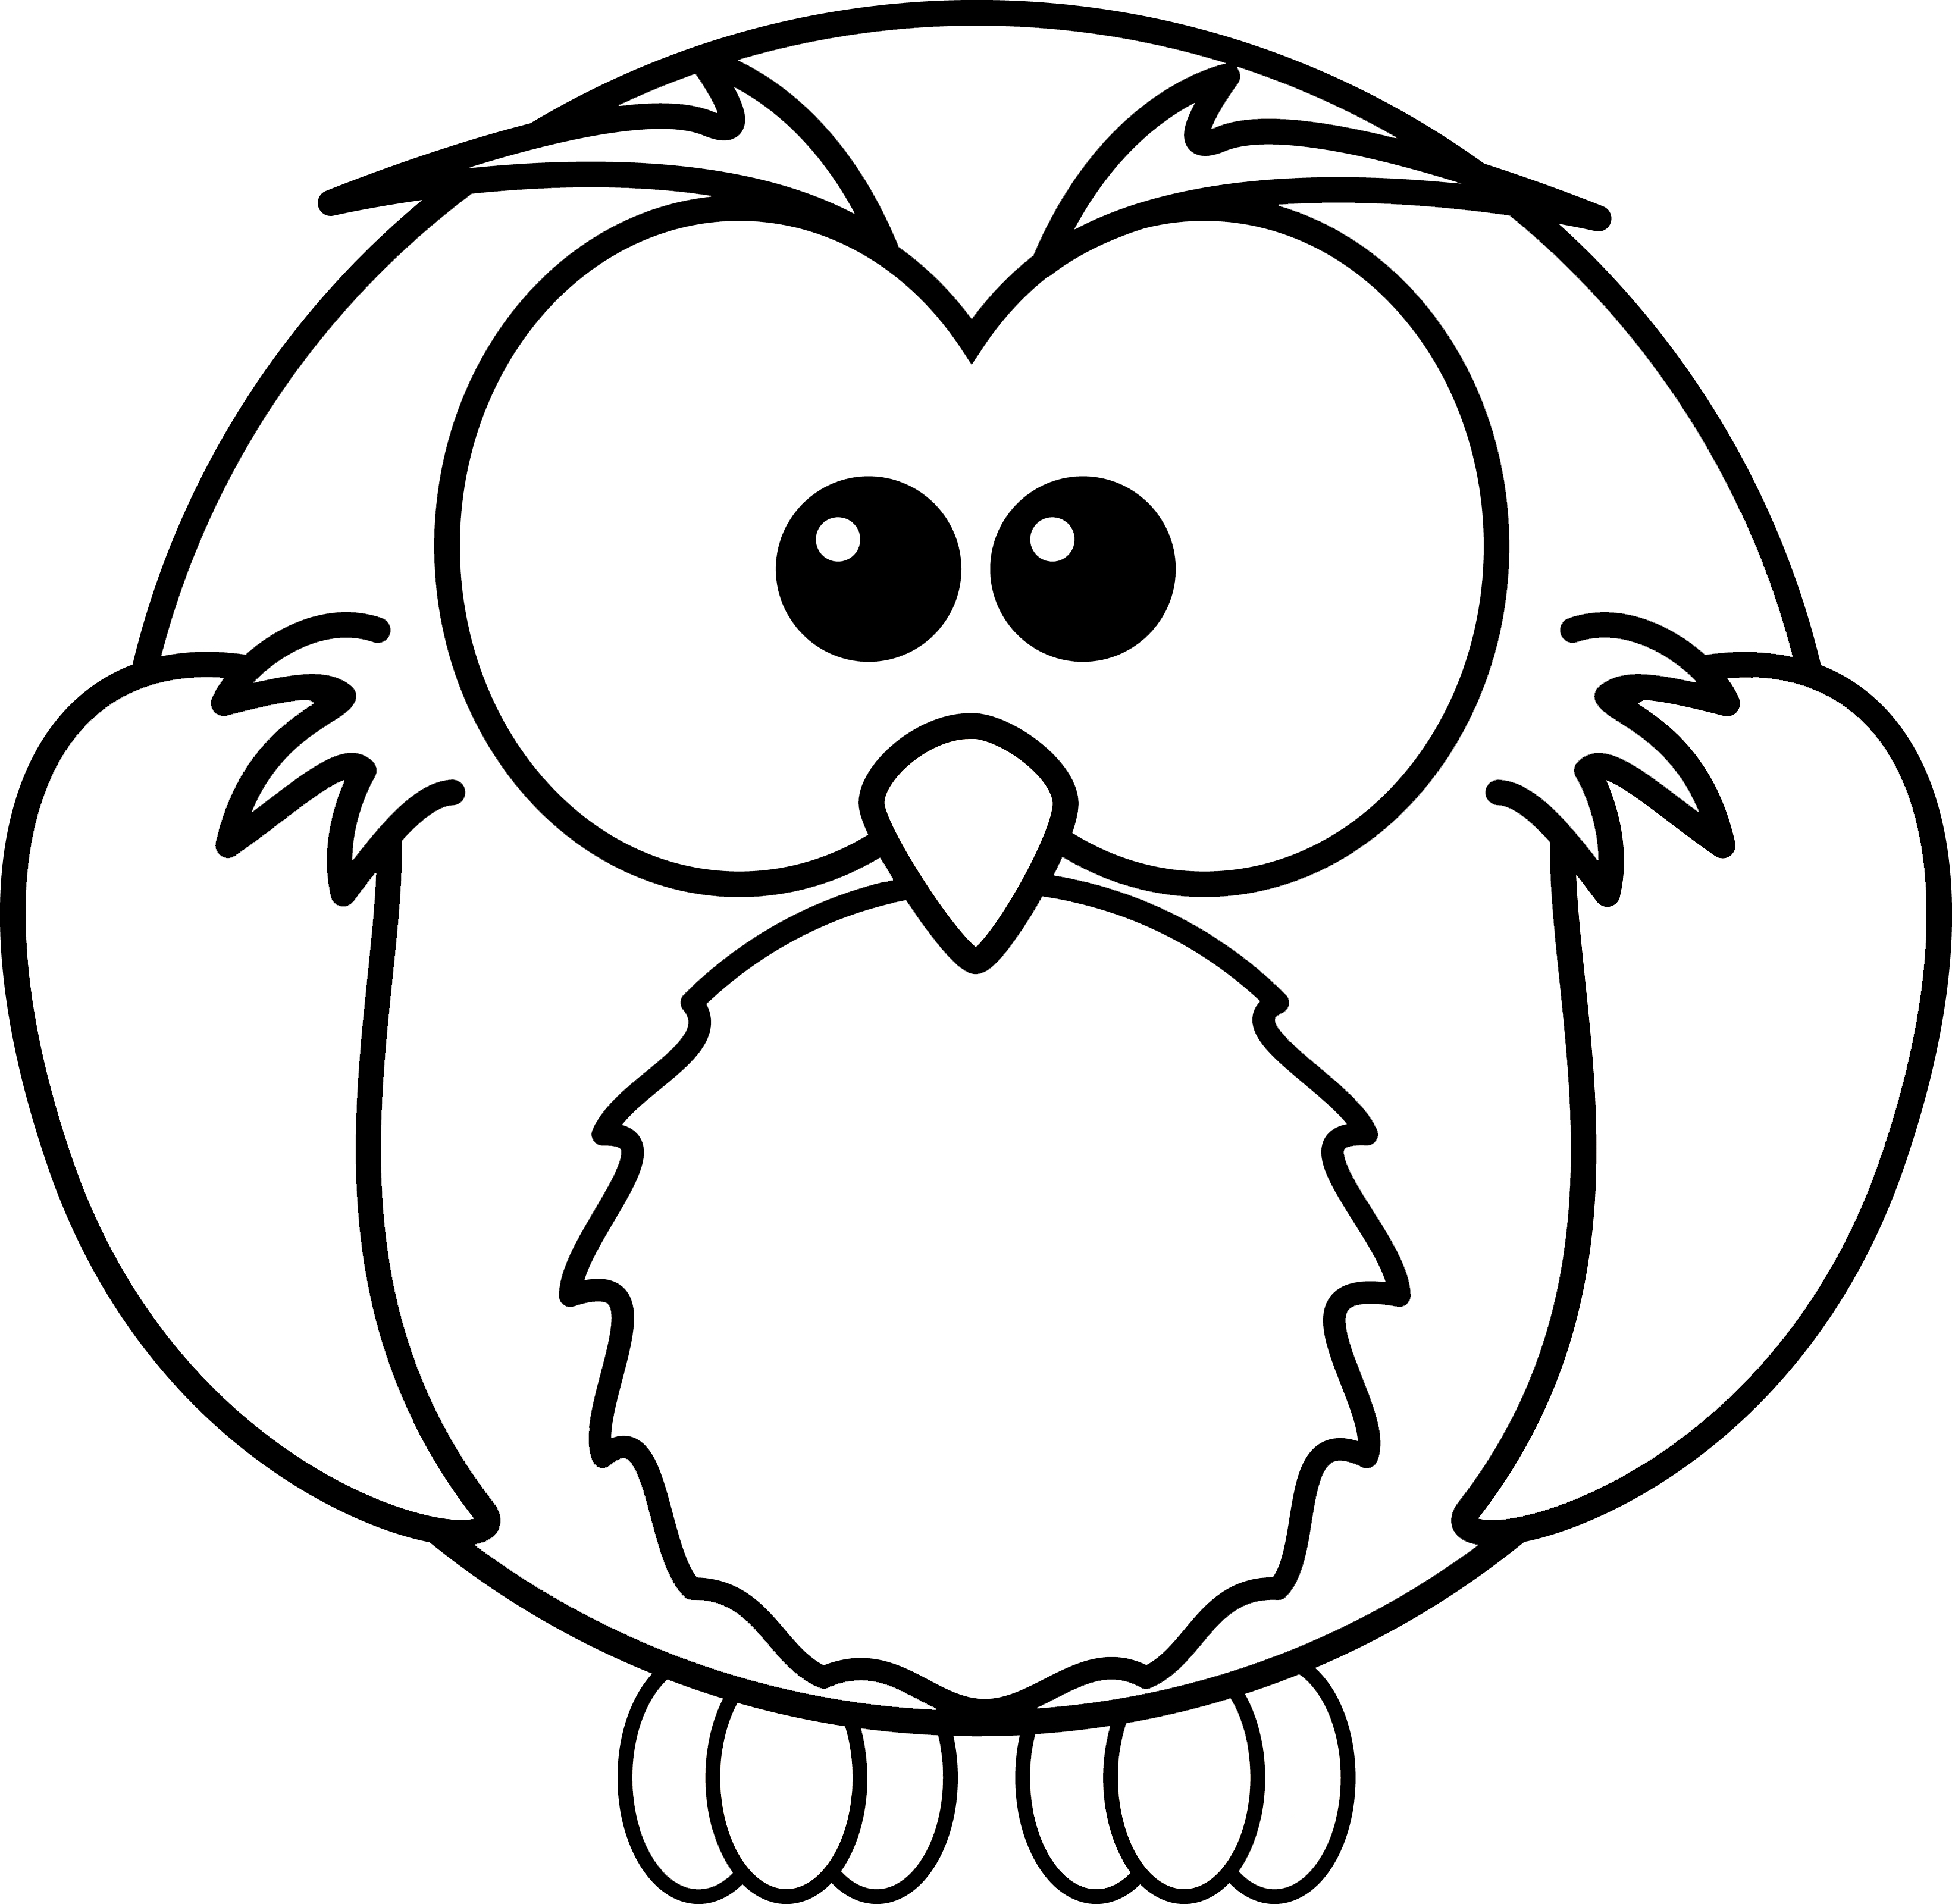 Cartoon Picture Of Owl - ClipArt Best